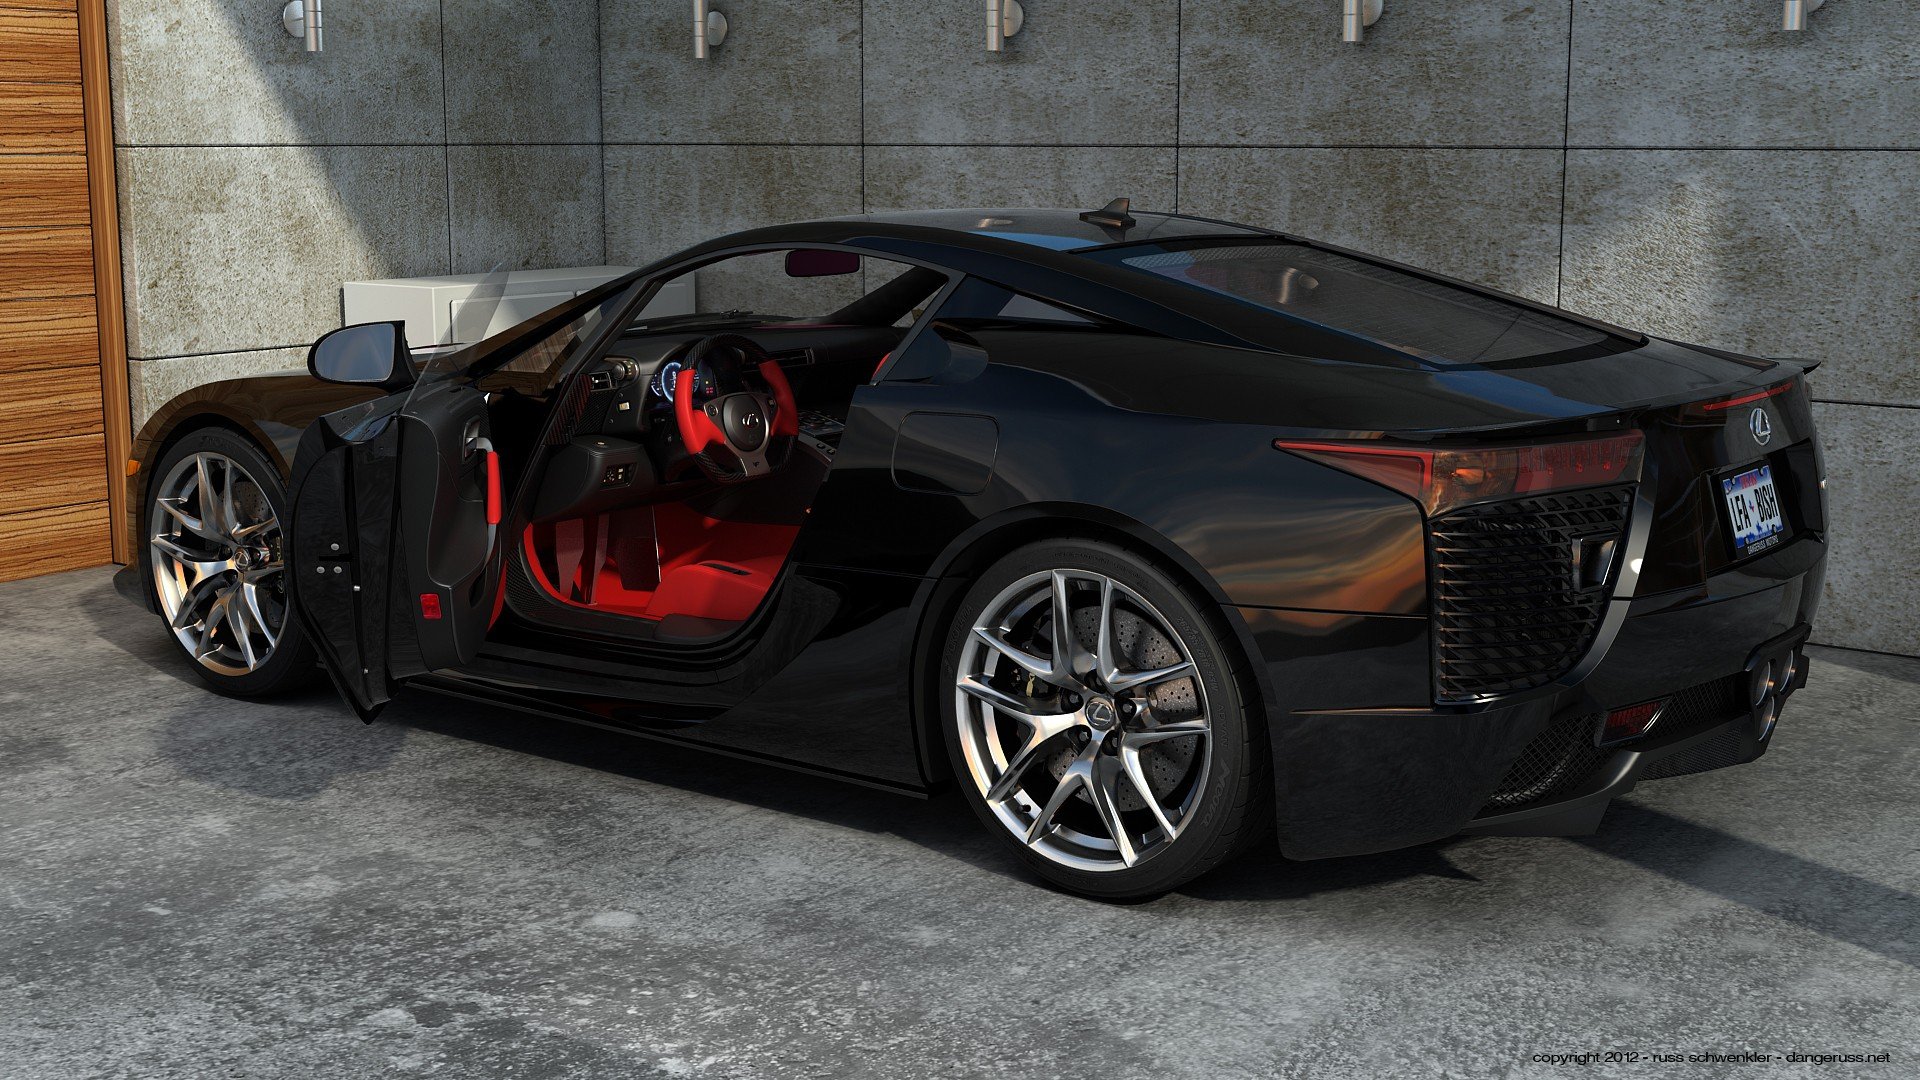 40 Lexus Lfa Hd Wallpapers Background Images Wallpaper Abyss